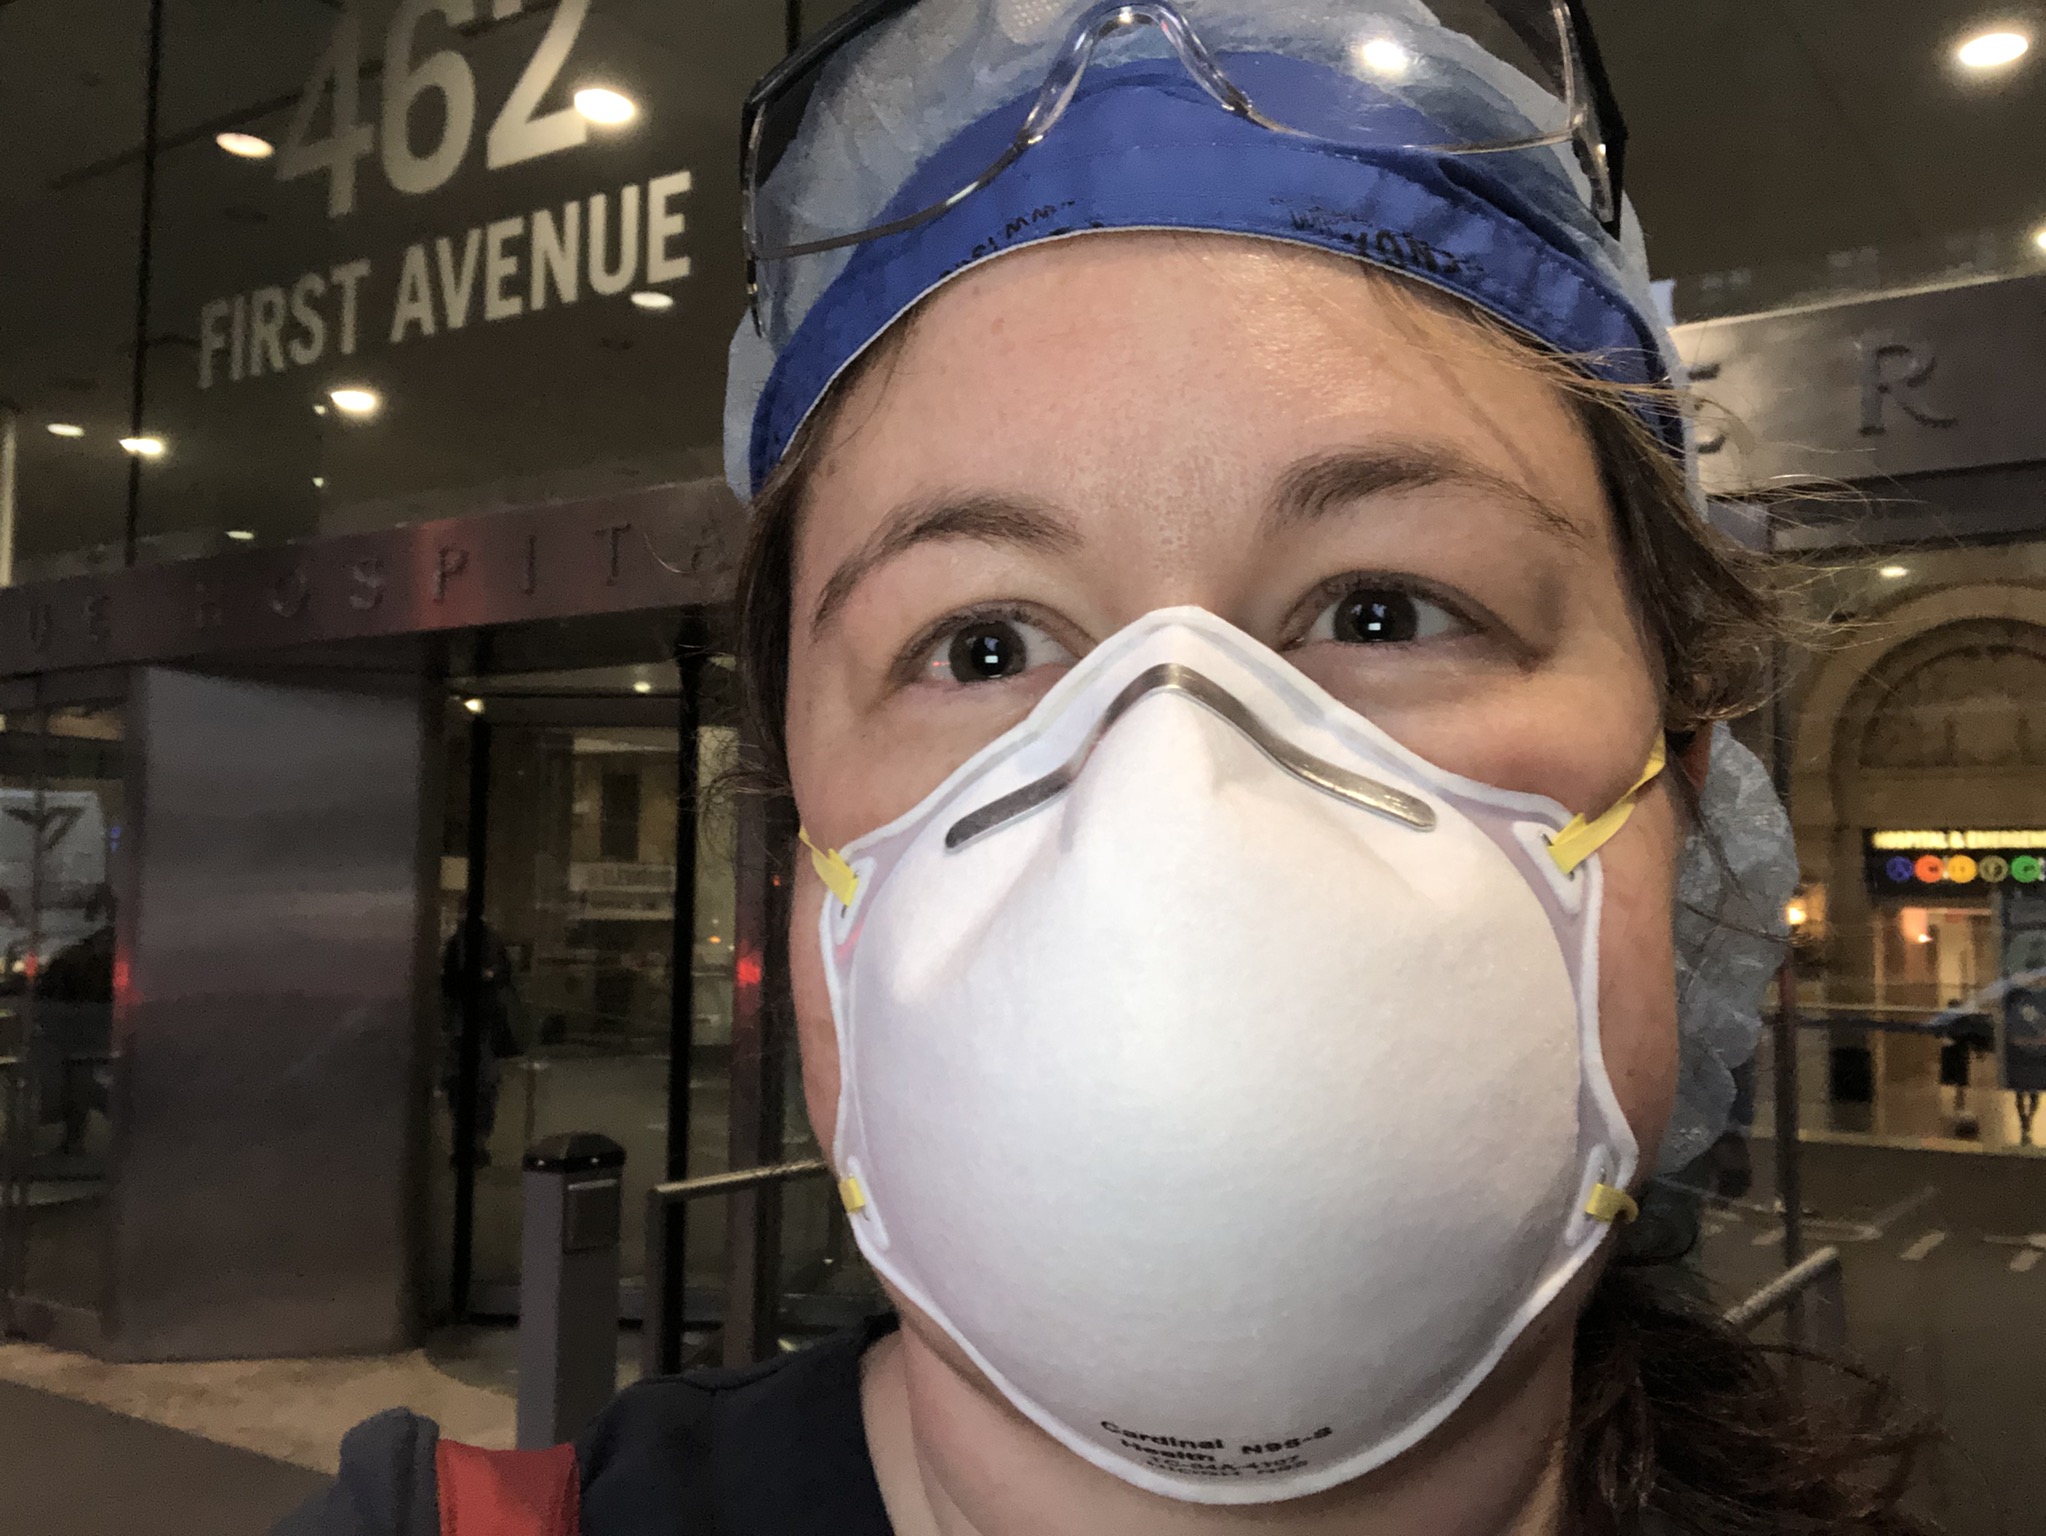 Kelly Casler wearing face mask on street in New York